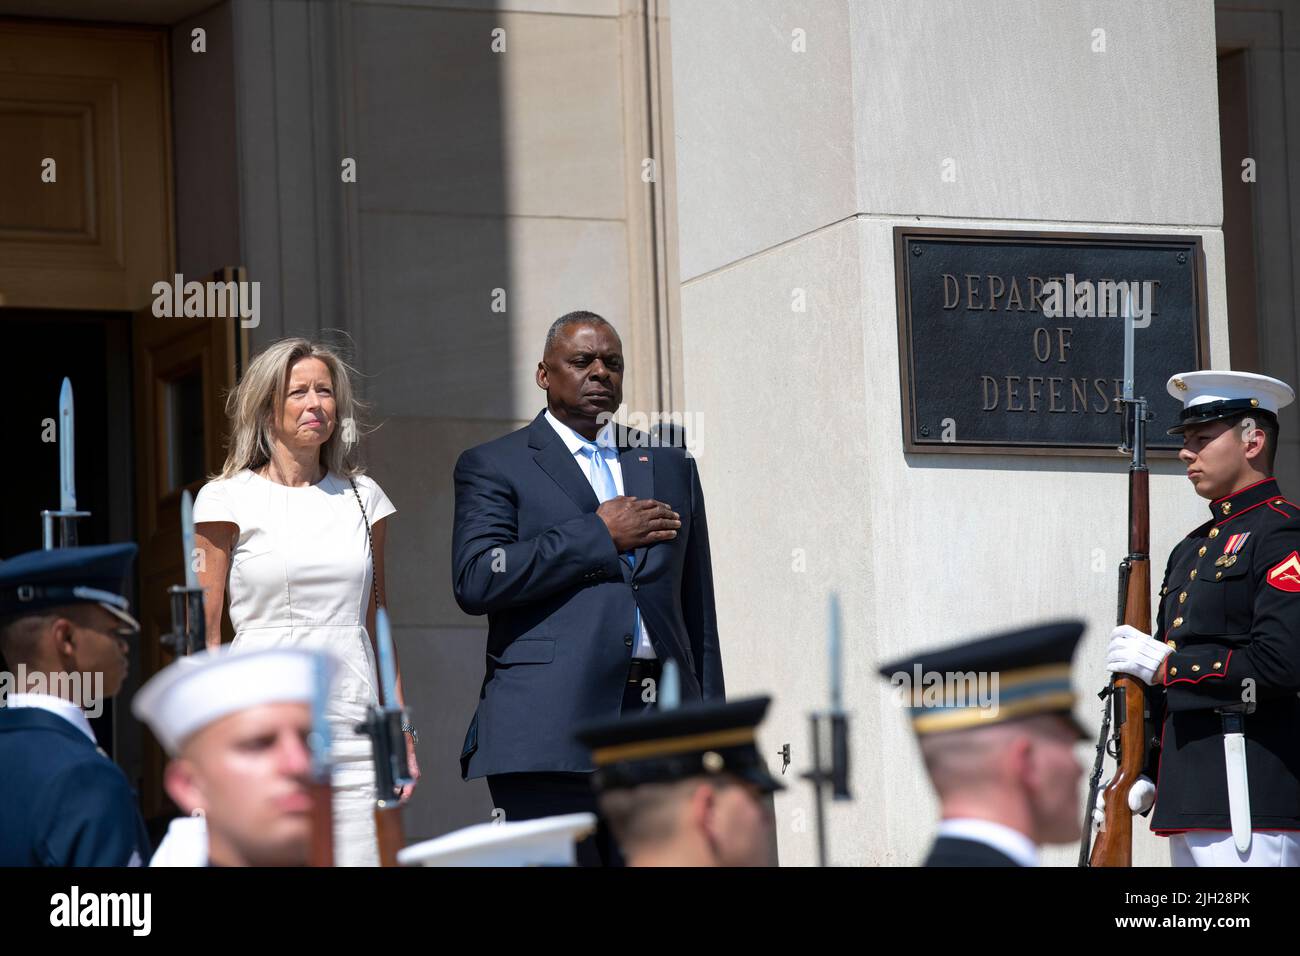 Arlington, United States Of America. 13th July, 2022. Arlington, United States of America. 13 July, 2022. U.S. Secretary of Defense Lloyd J. Austin III, right, stands with Dutch Defense Minister Kajsa Ollongren, during the arrival ceremony at the Pentagon, July 13, 2022 in Arlington, Virginia. Credit: Lisa Ferdinando/DOD/Alamy Live News Stock Photo